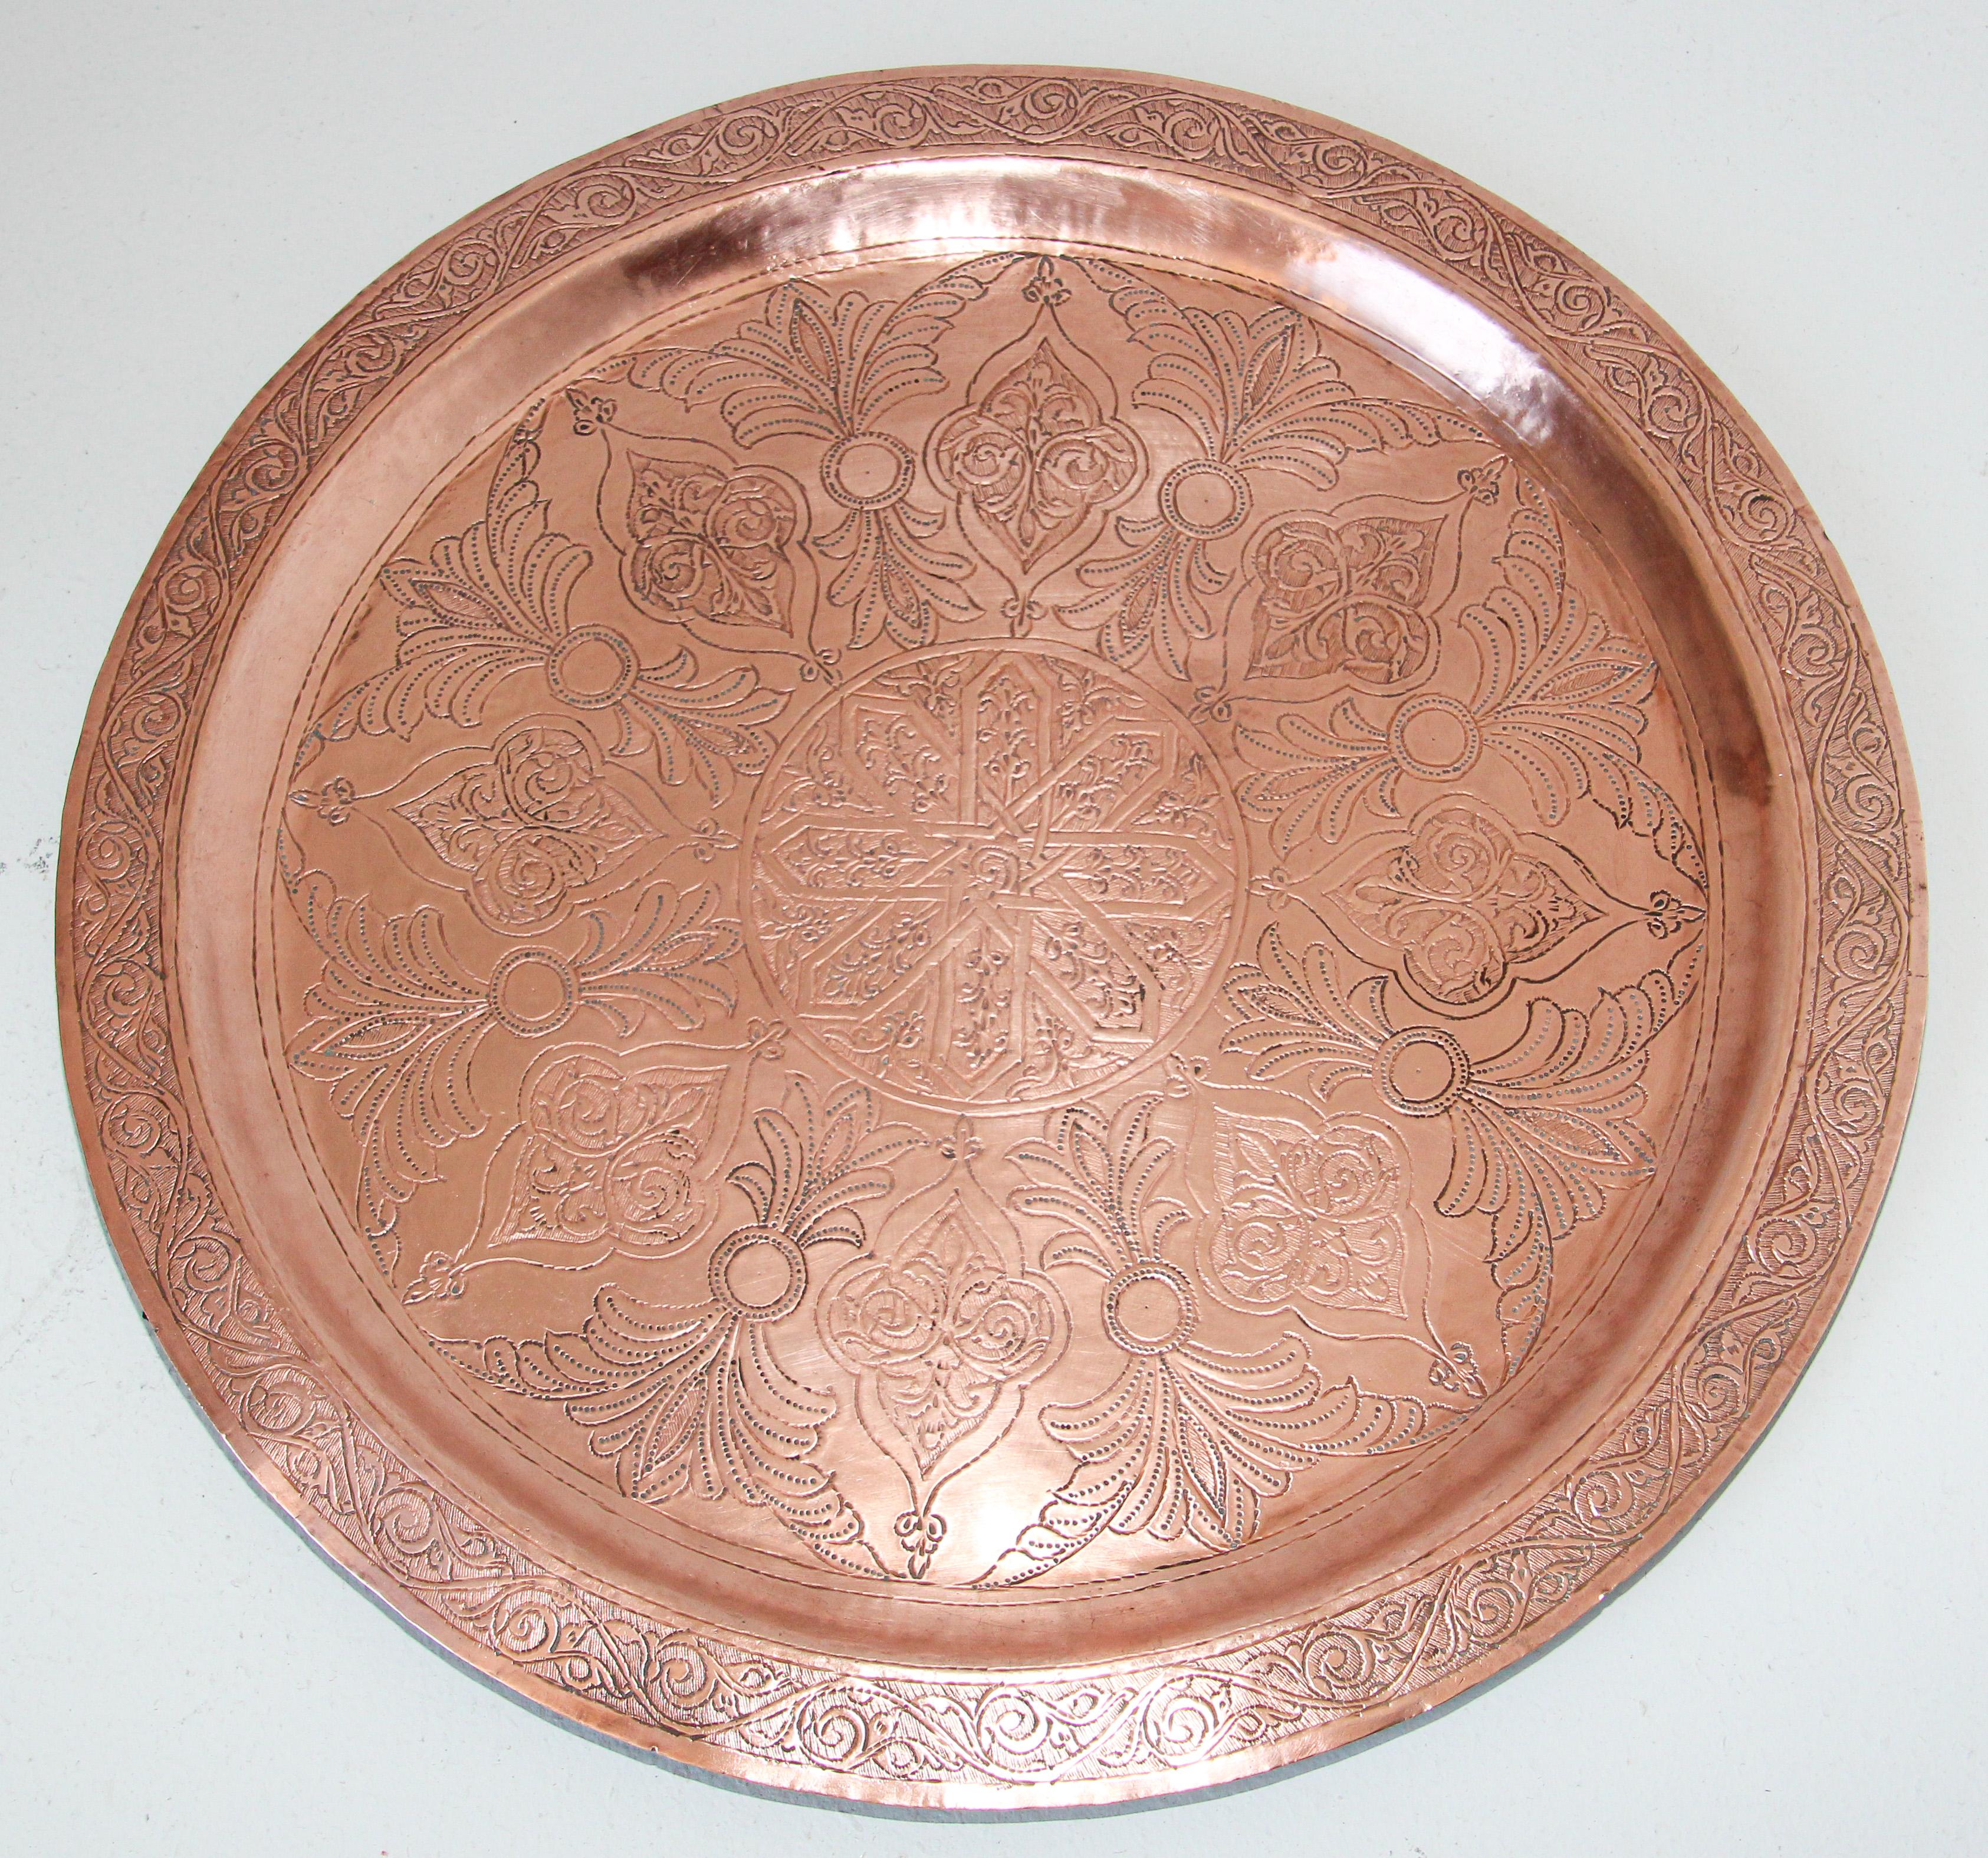 Moroccan Moorish style antique round copper tray.
The handcrafted circular copper metal platter is decorated and hammered with Islamic Moorish floral and geometric designs.
Heavy red metal copper plate with very fine hand chased floral and